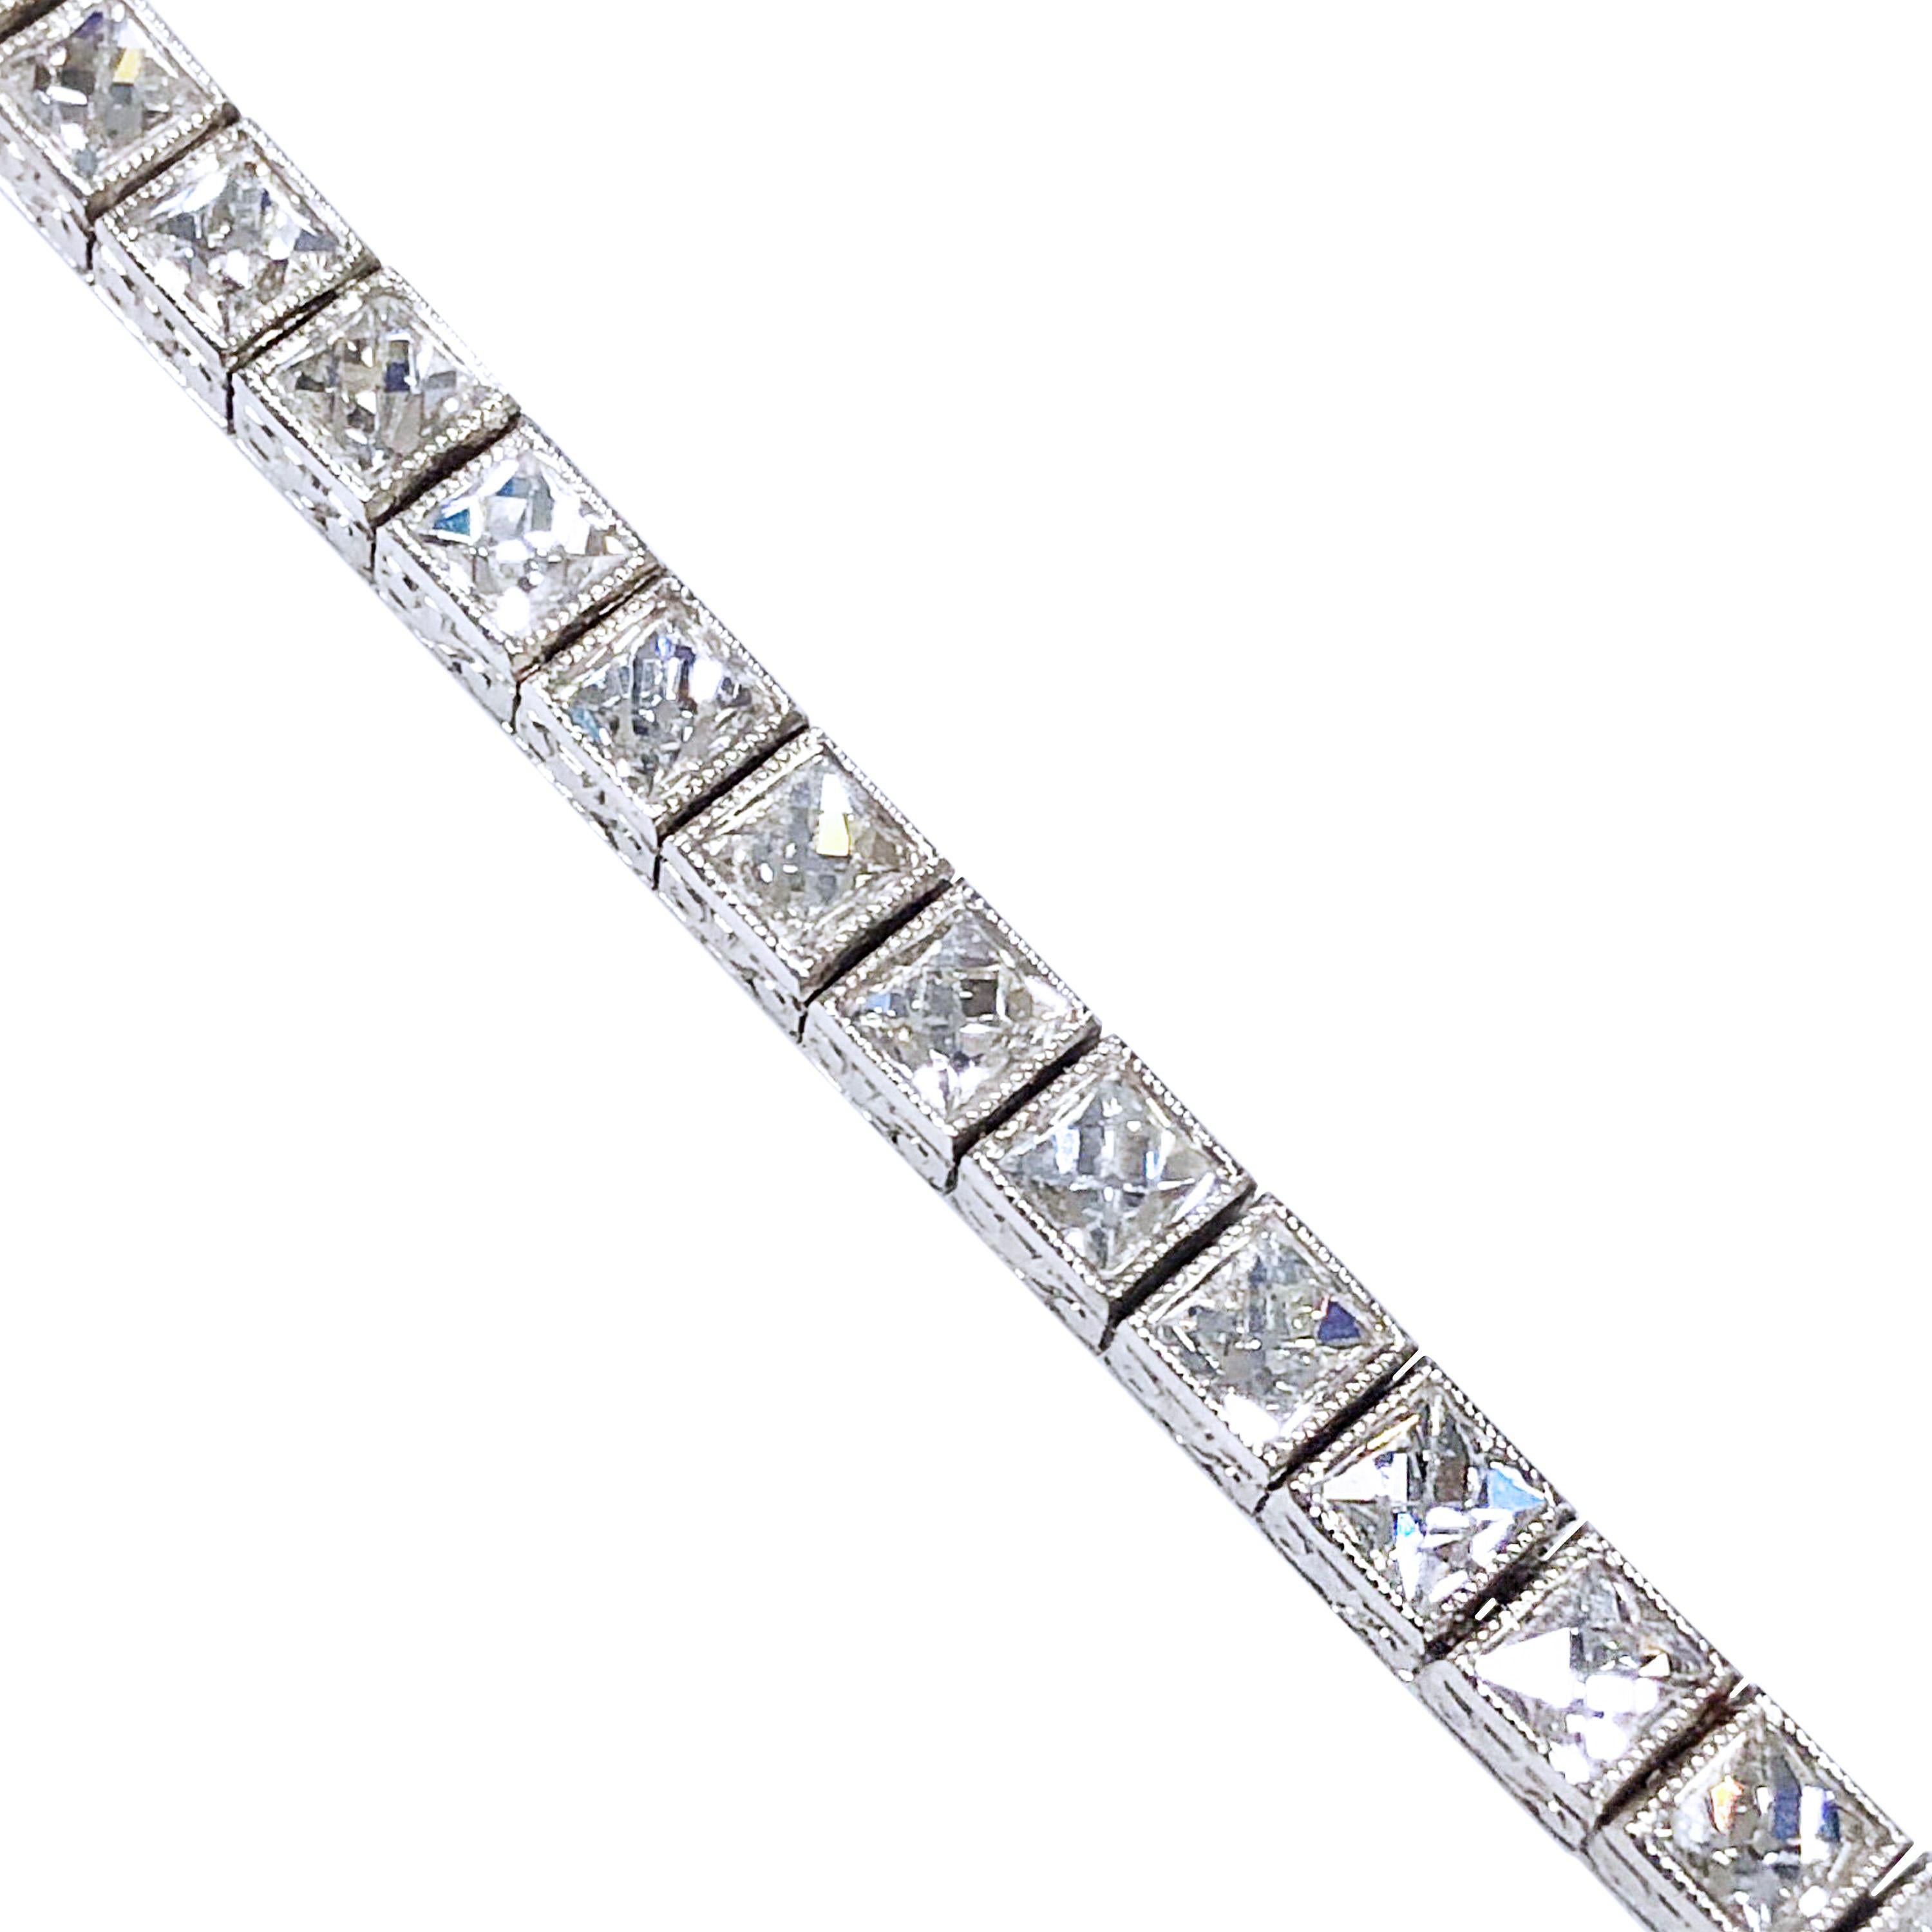 An Art Deco style Platinum Line Bracelet of French Cut Diamonds, measuring 7 1/4 inches in length and 3/16 inch wide. Each box setting is articulated for soft flexibility, milgrain and hand engraved detail throughout. The French Cut Diamonds are all